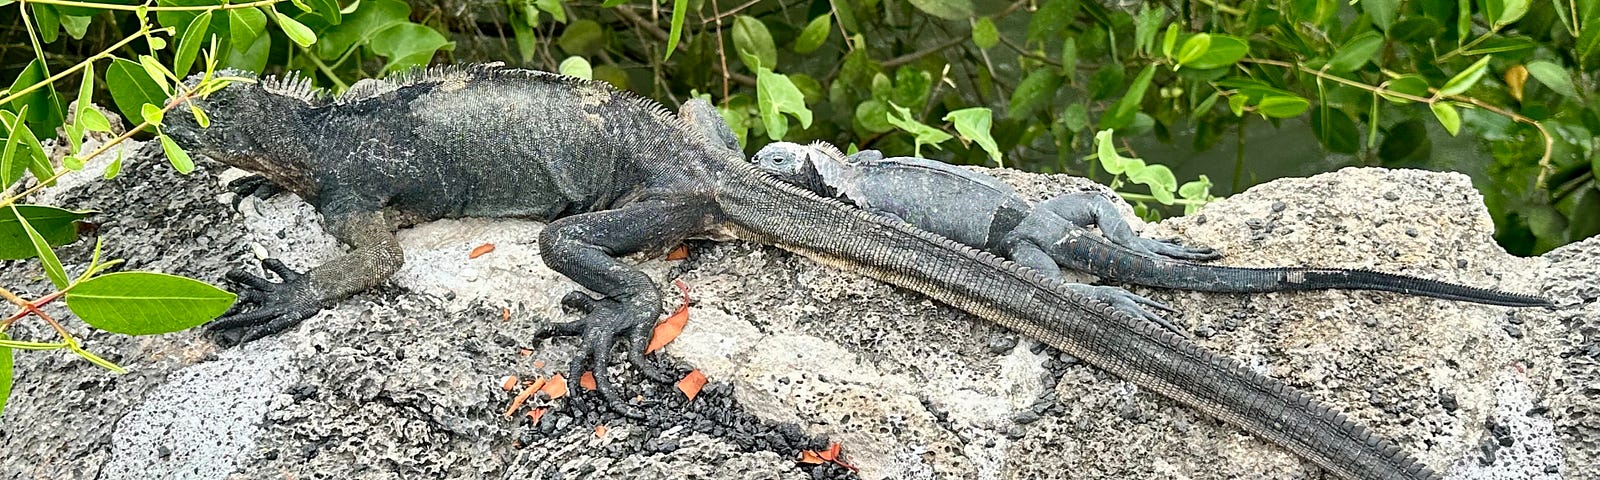 A large black marine iguana suns herself on a cement pathway border, accompanied by a young gray offspring.